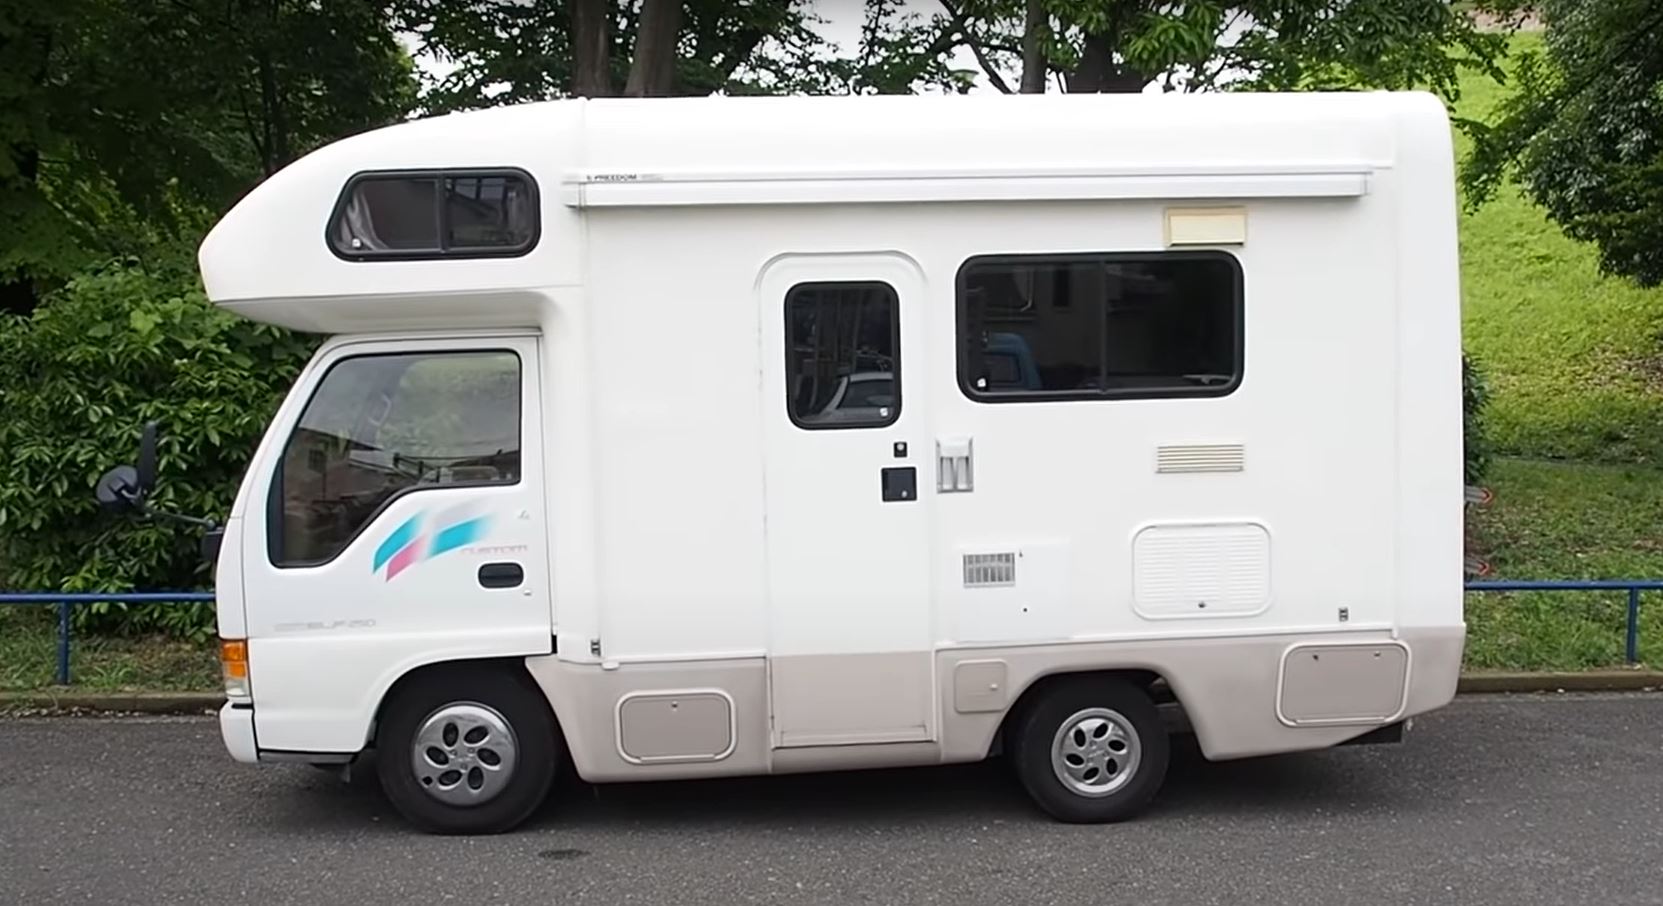 A small, white Isuzu RV is viewed from the driver's side.